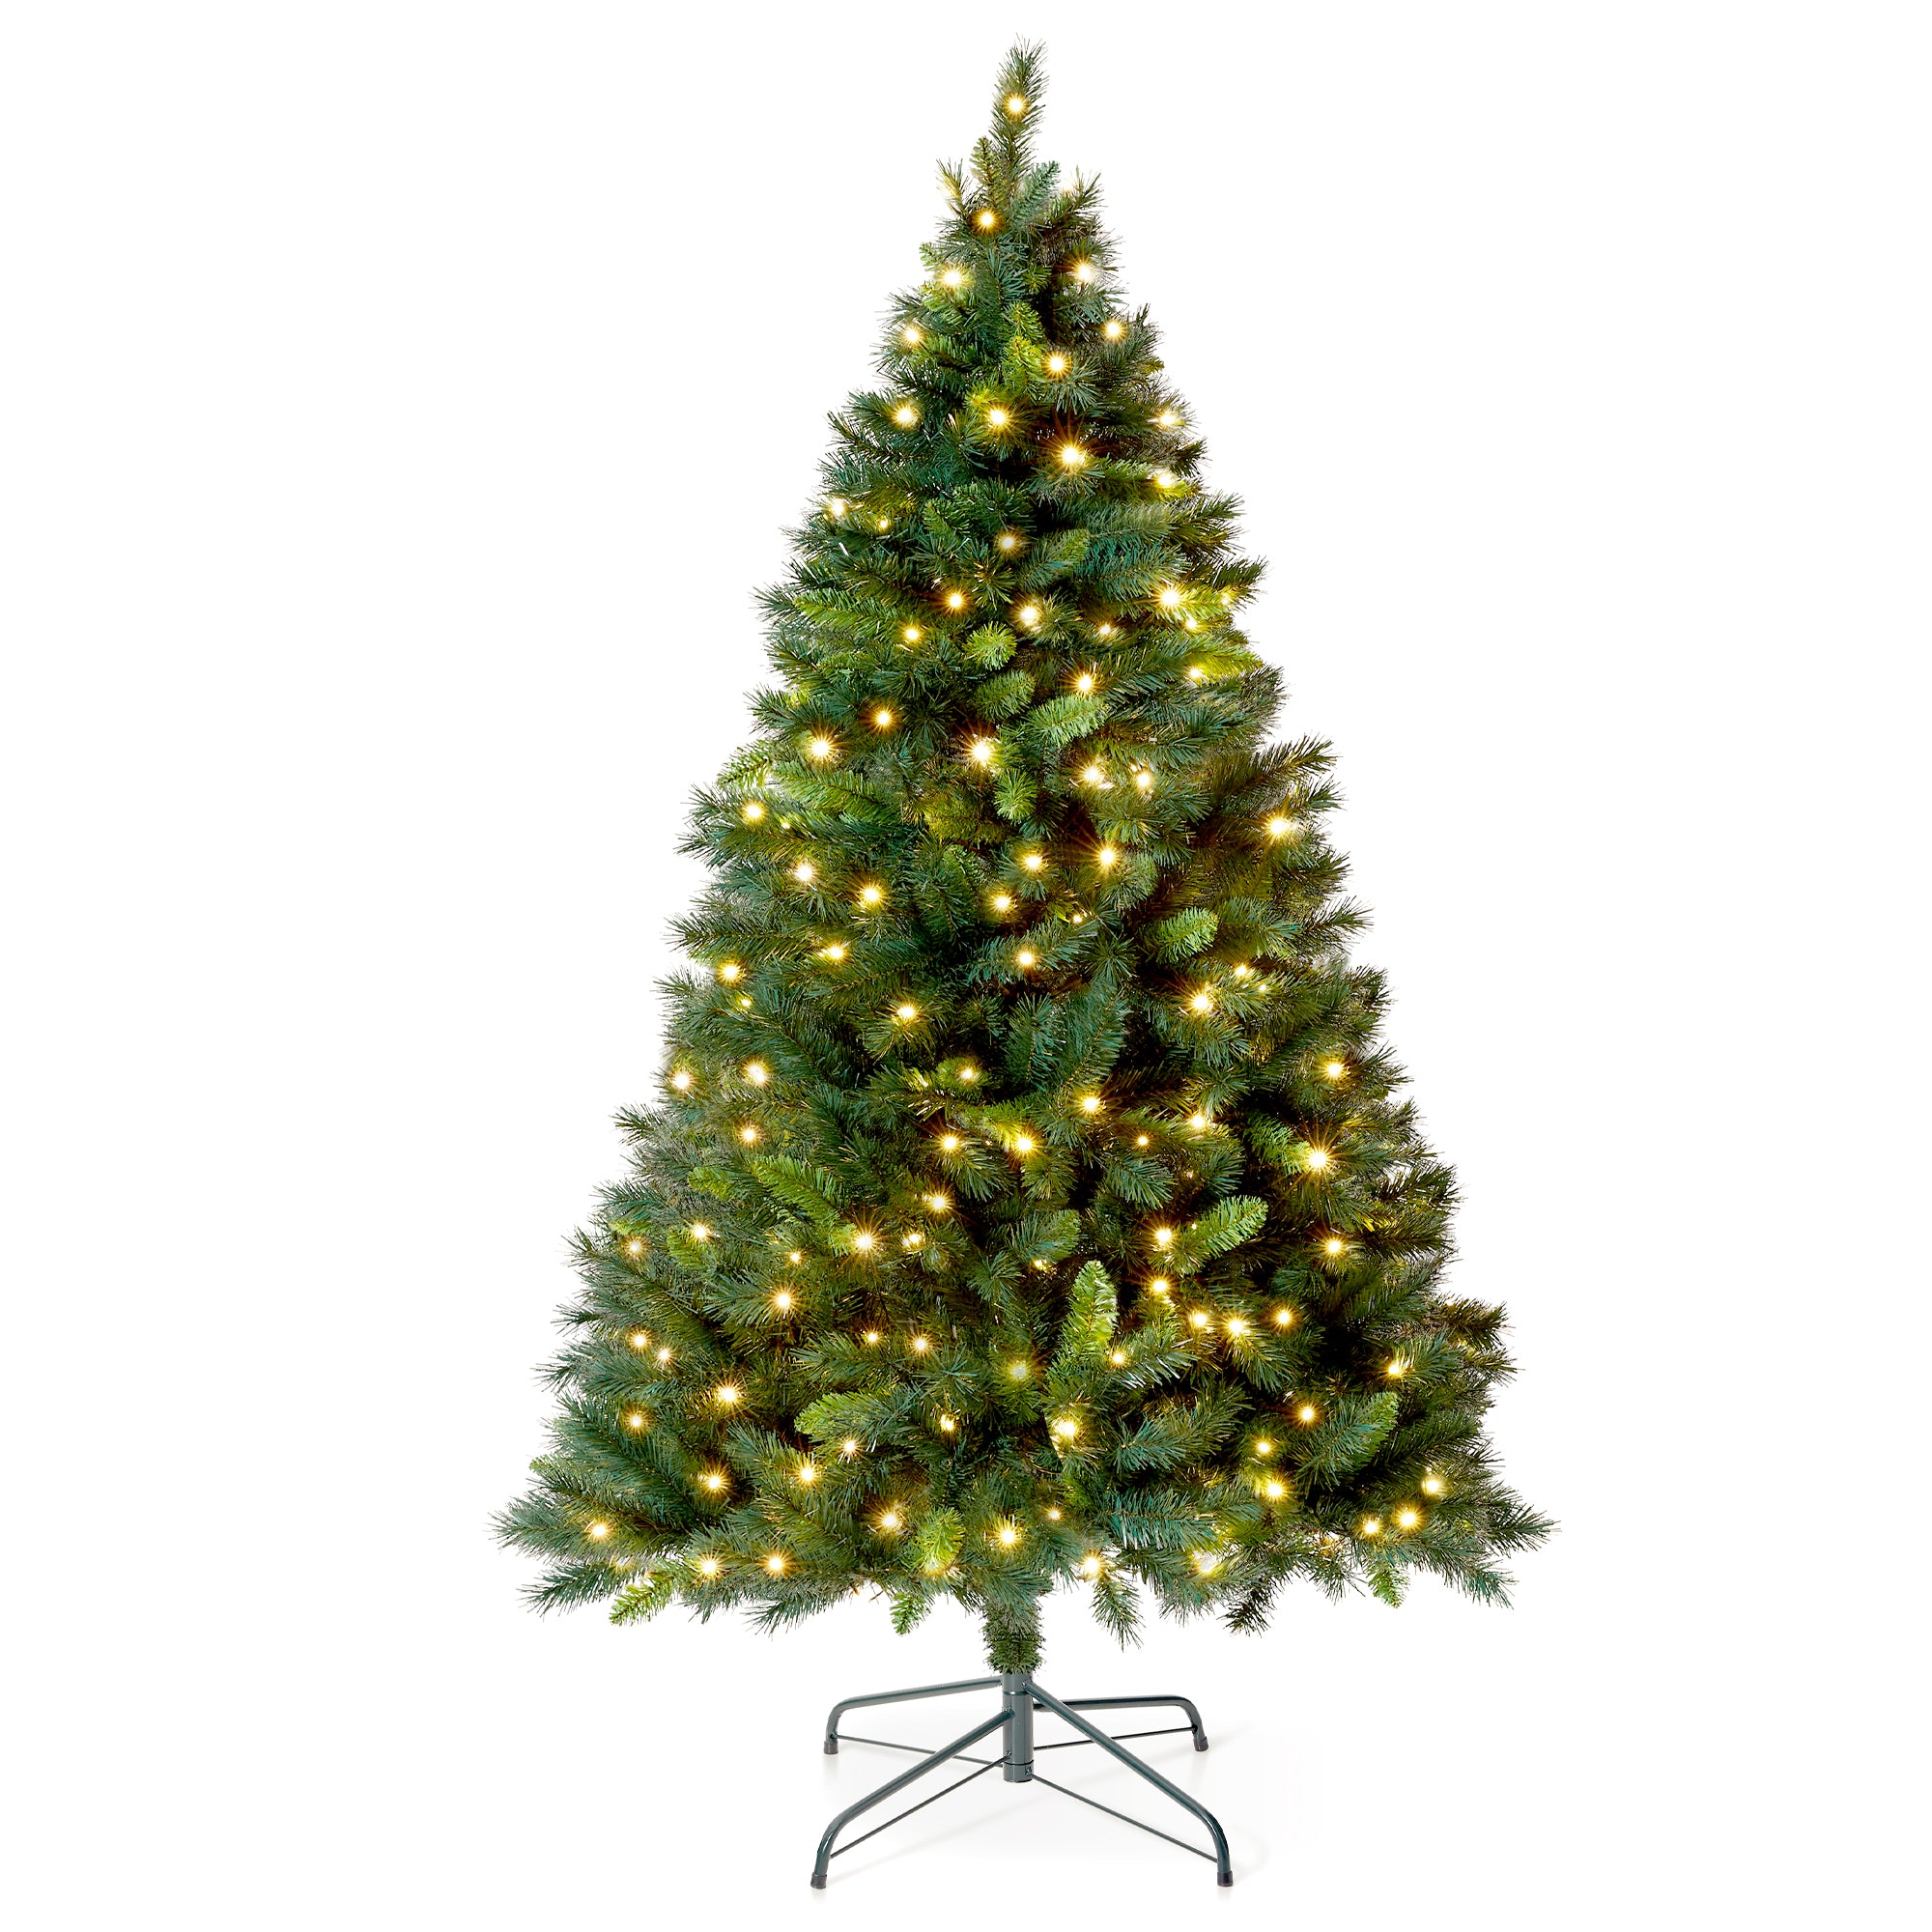 5FT Snowhill Pre Lit Christmas Tree with 200 Built-In Lights with Timer, 8 Lighting Modes